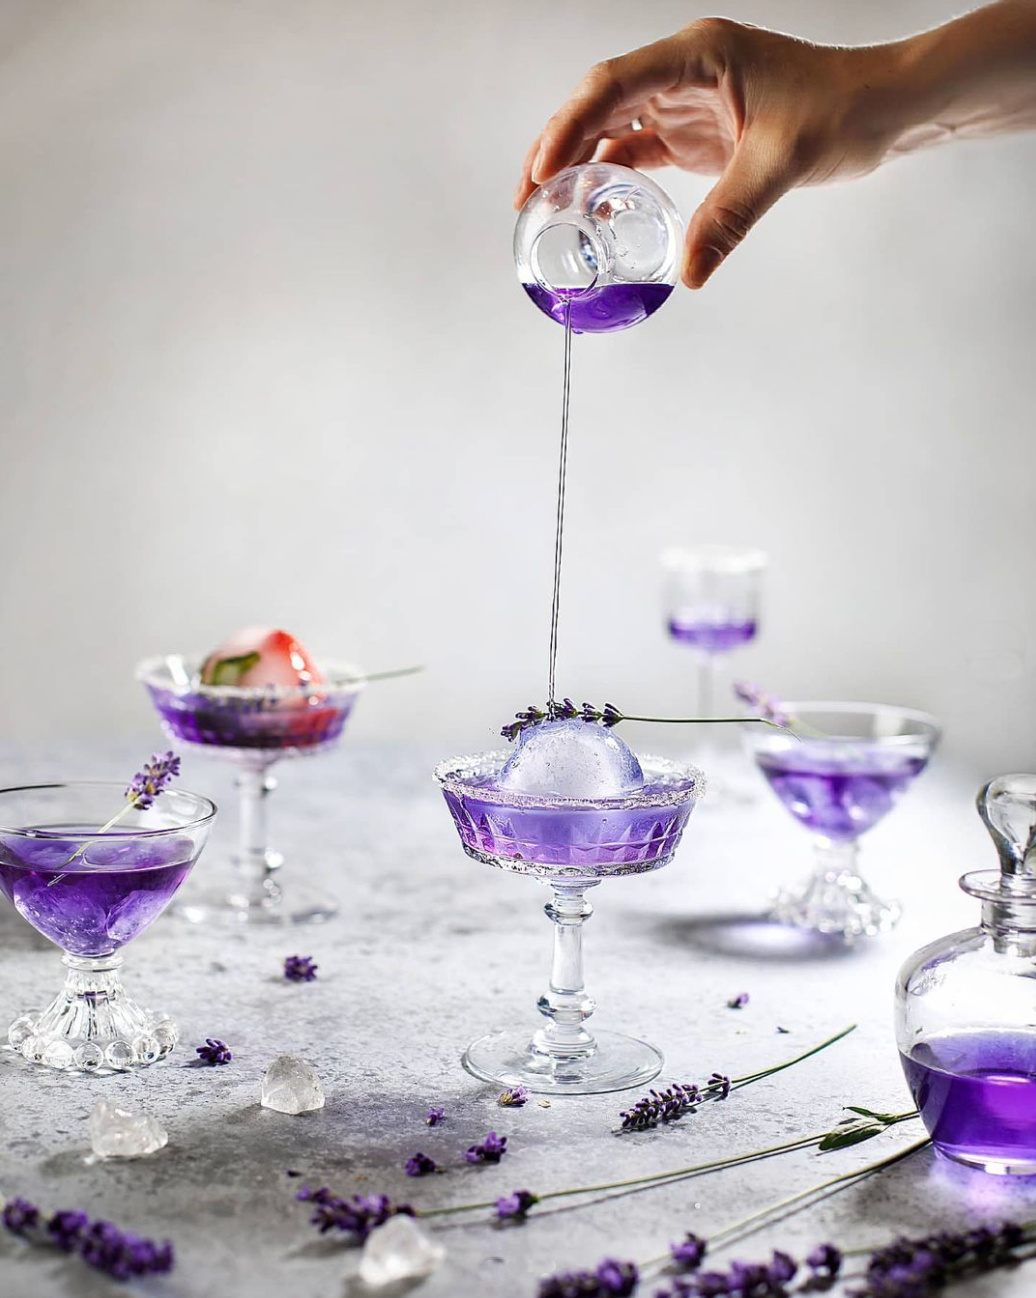 10 Gorgeous Beverage Photos That Will Knock Your Socks off